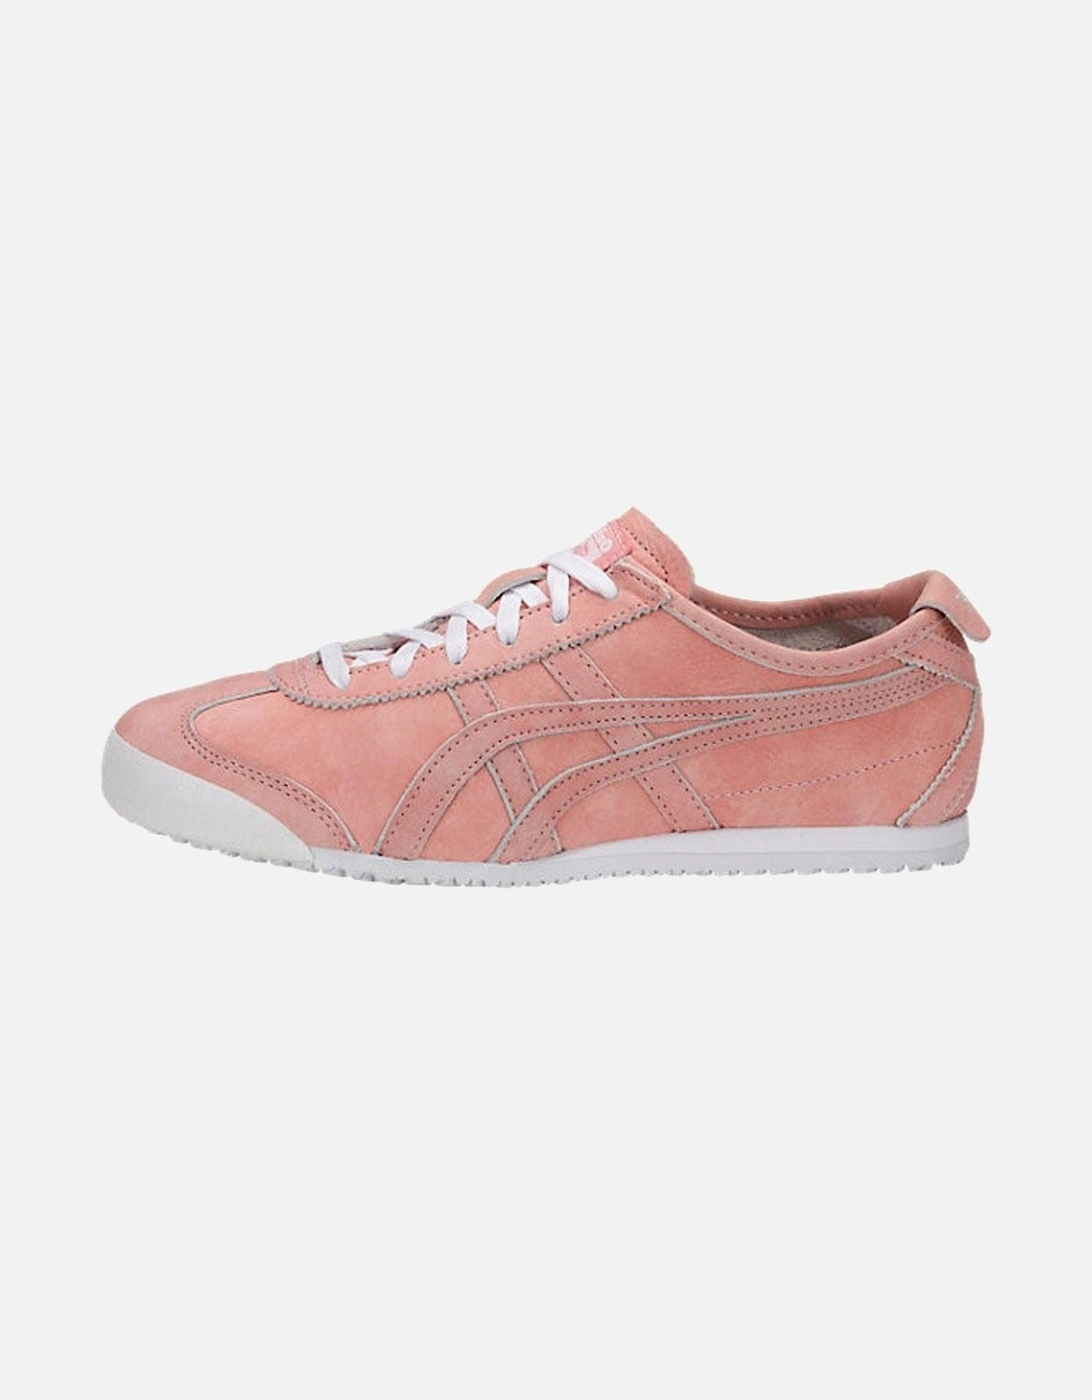 Mexico 66 Trainers - Coral Cloud Pink, 5 of 4